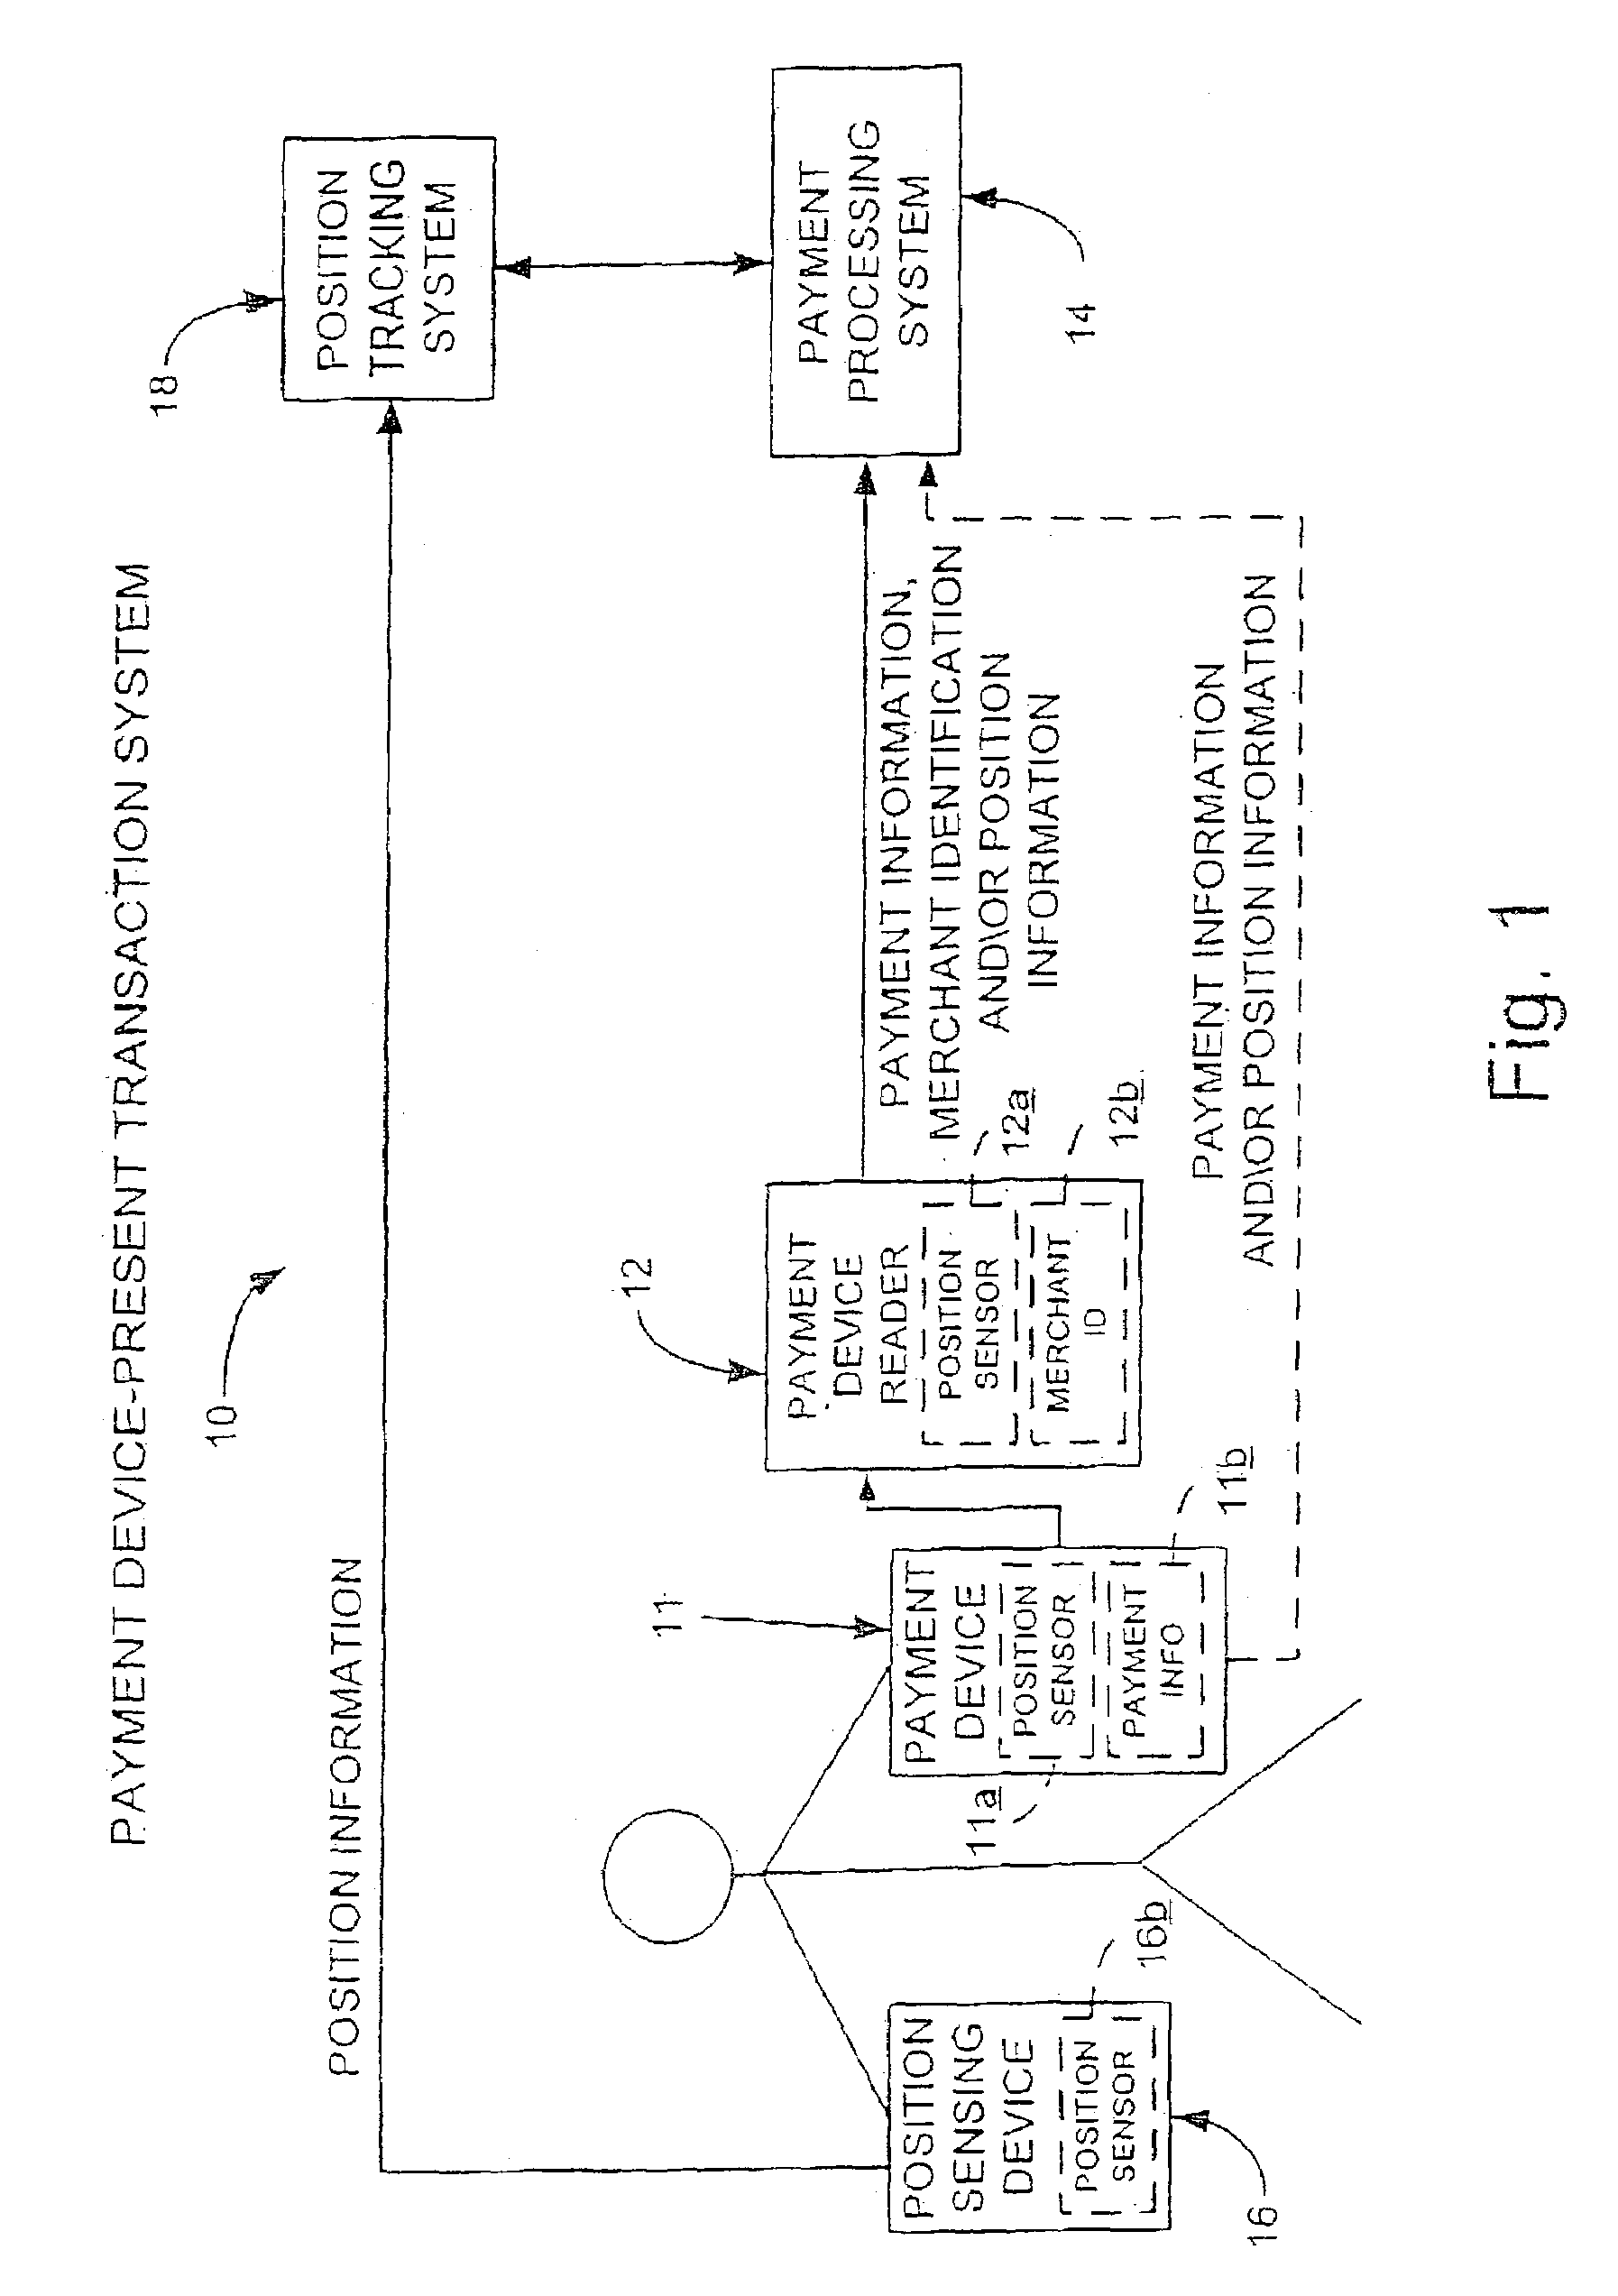 Location based fraud reduction system and method